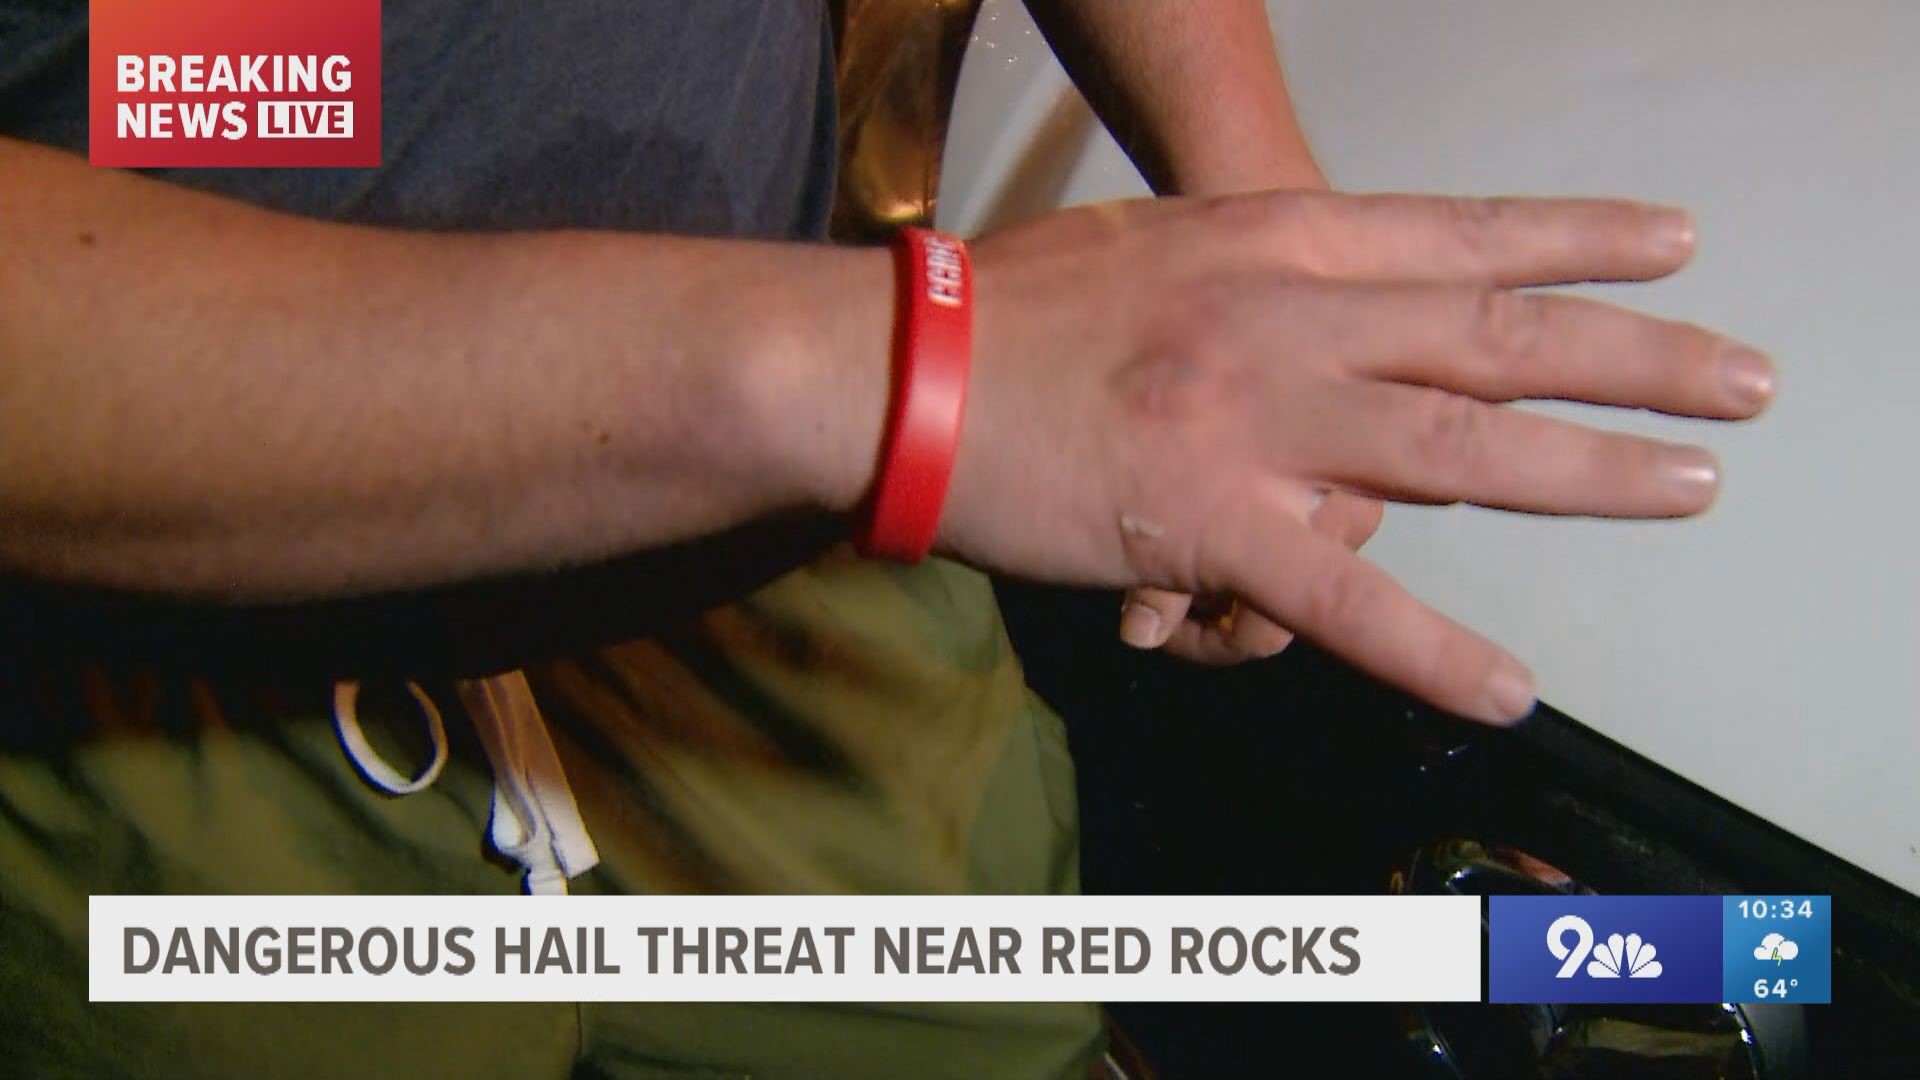 Major hailstorm blasts Red Rocks, injuries reported